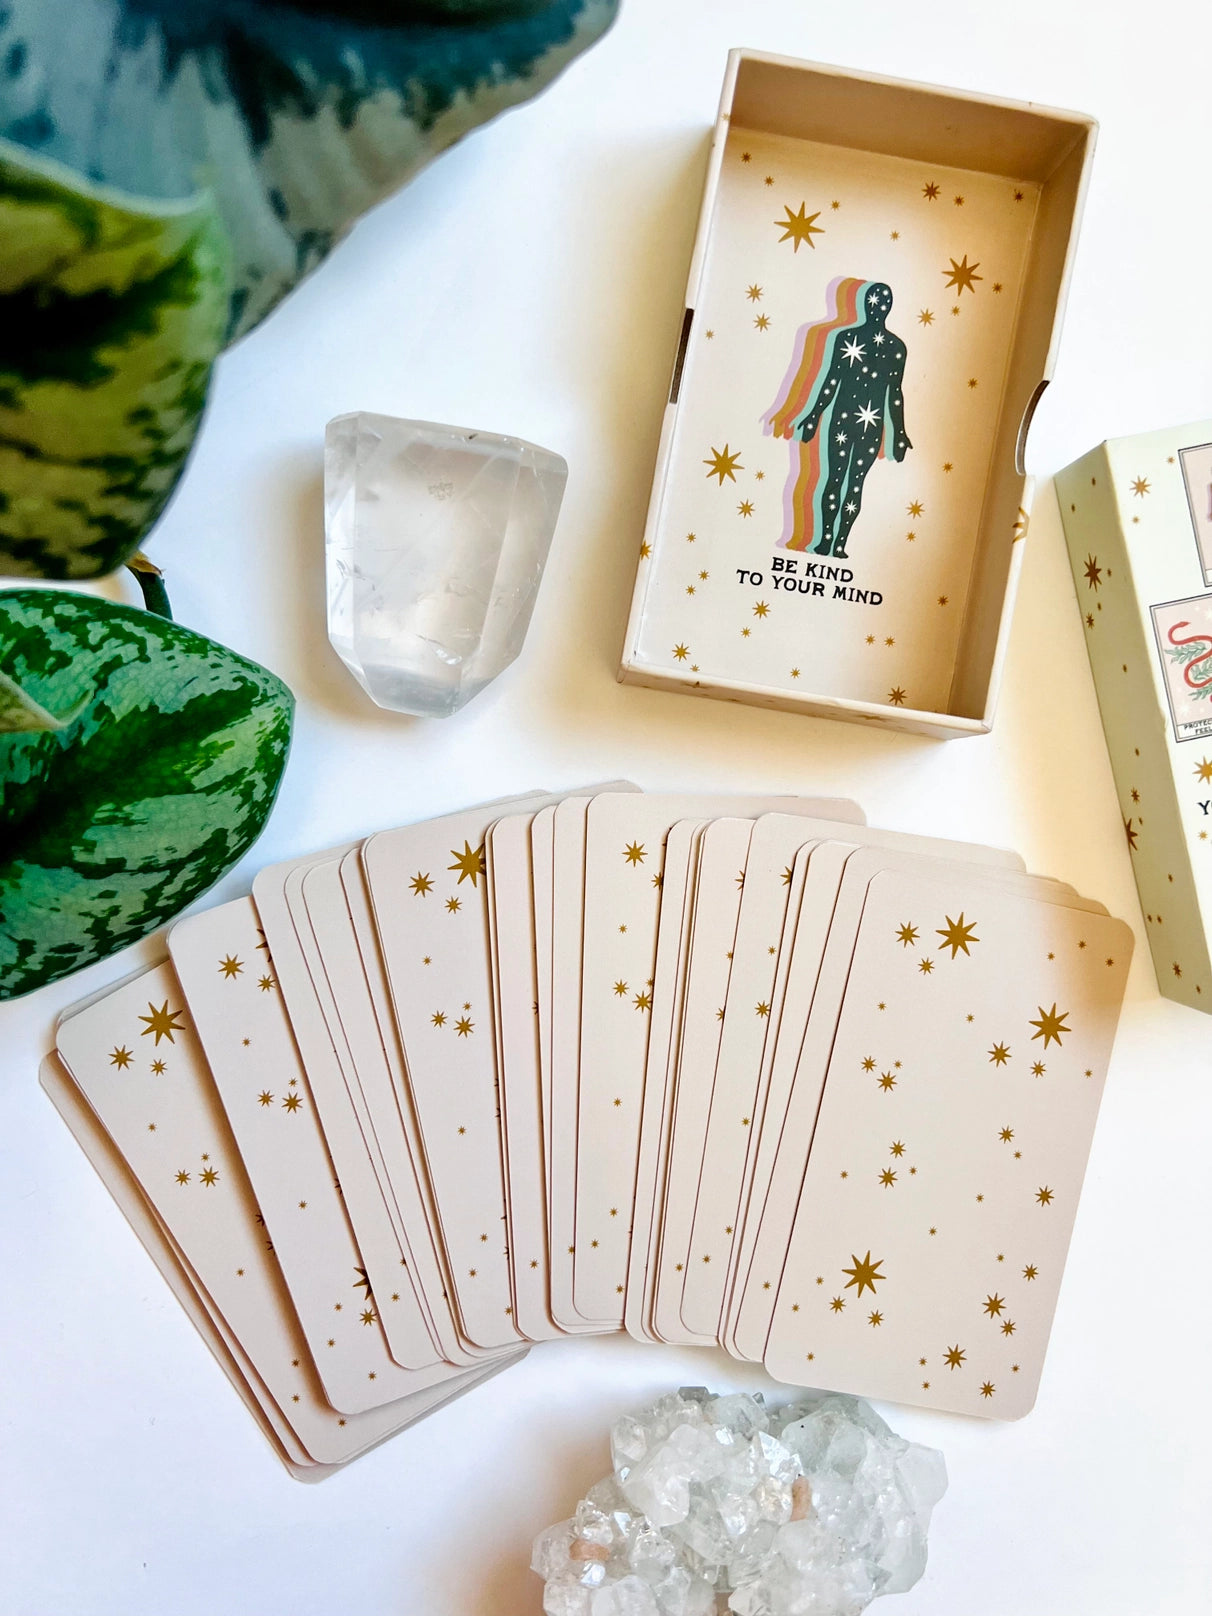 Your Feelings Are Valid Oracle Deck - Moon Room Shop and Wellness